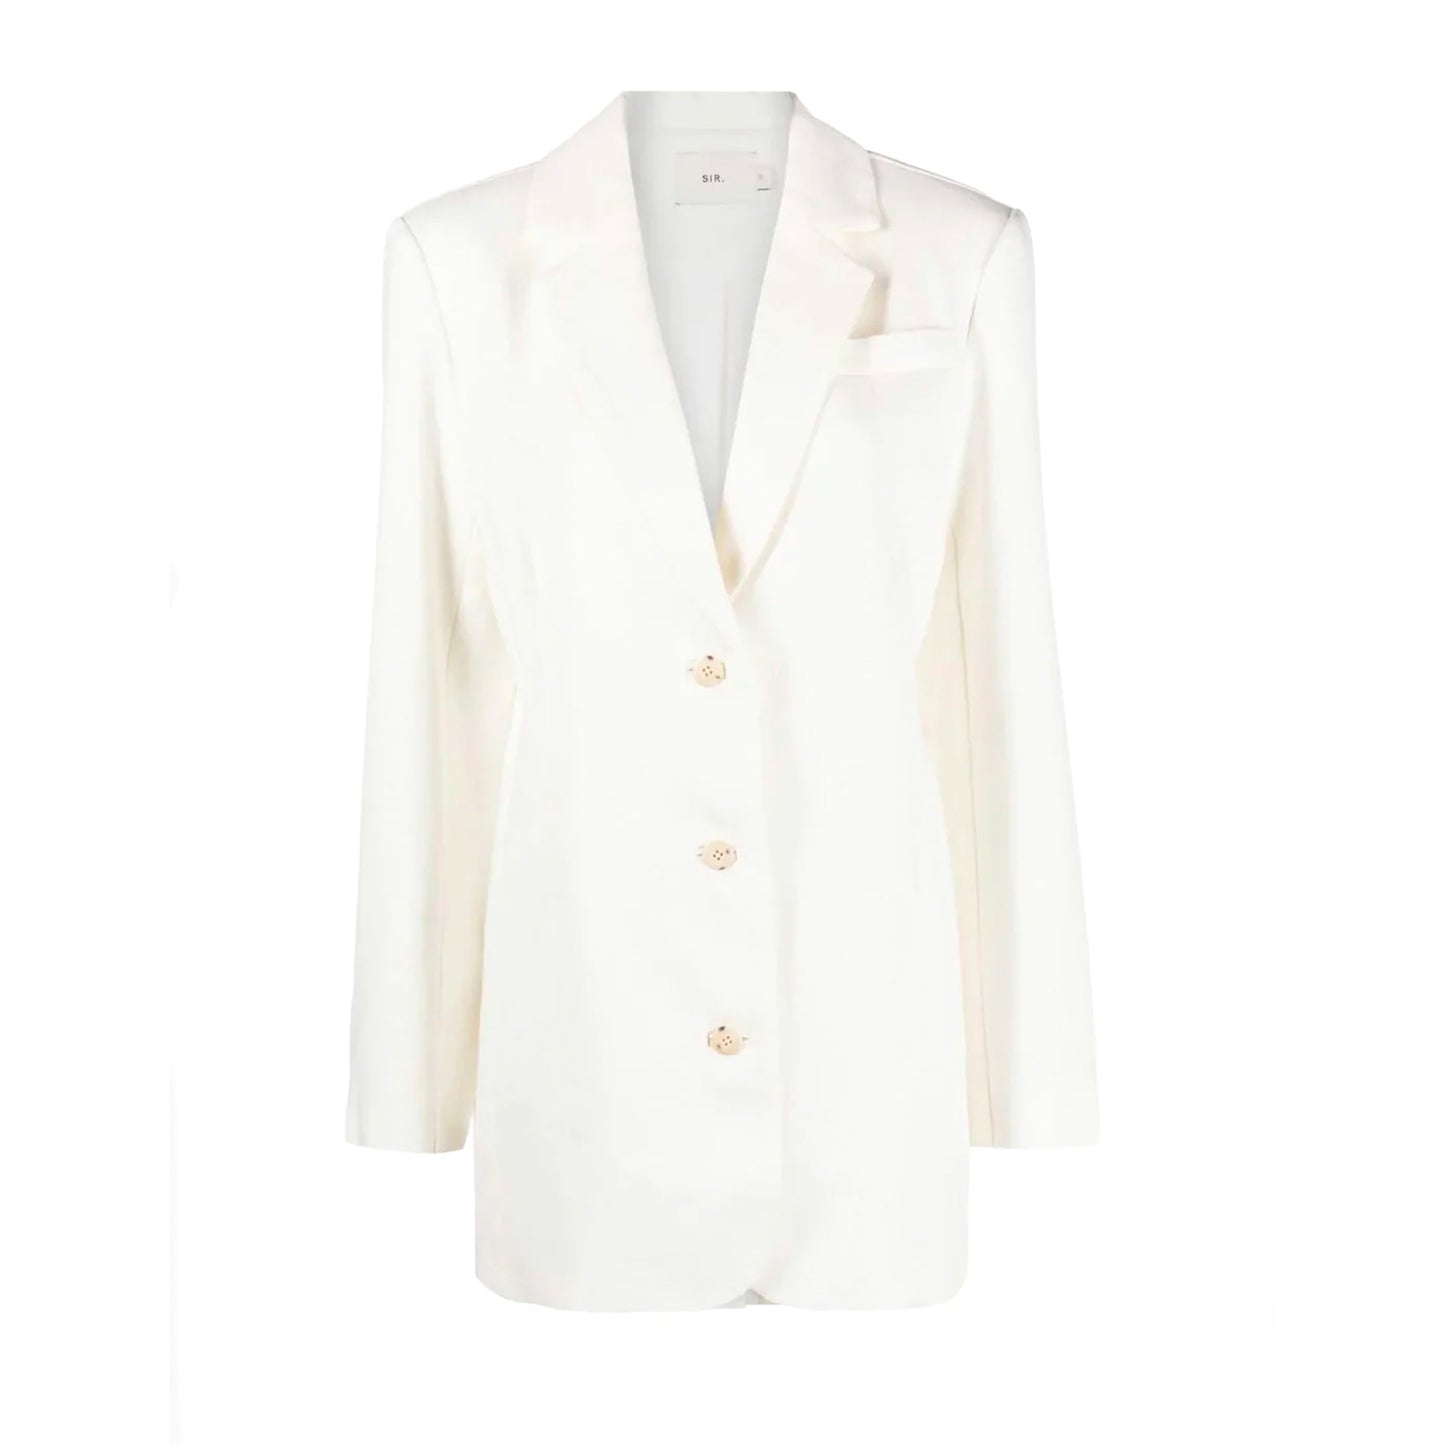 Load image into Gallery viewer, Sir White Clemence Blazer - nwt
